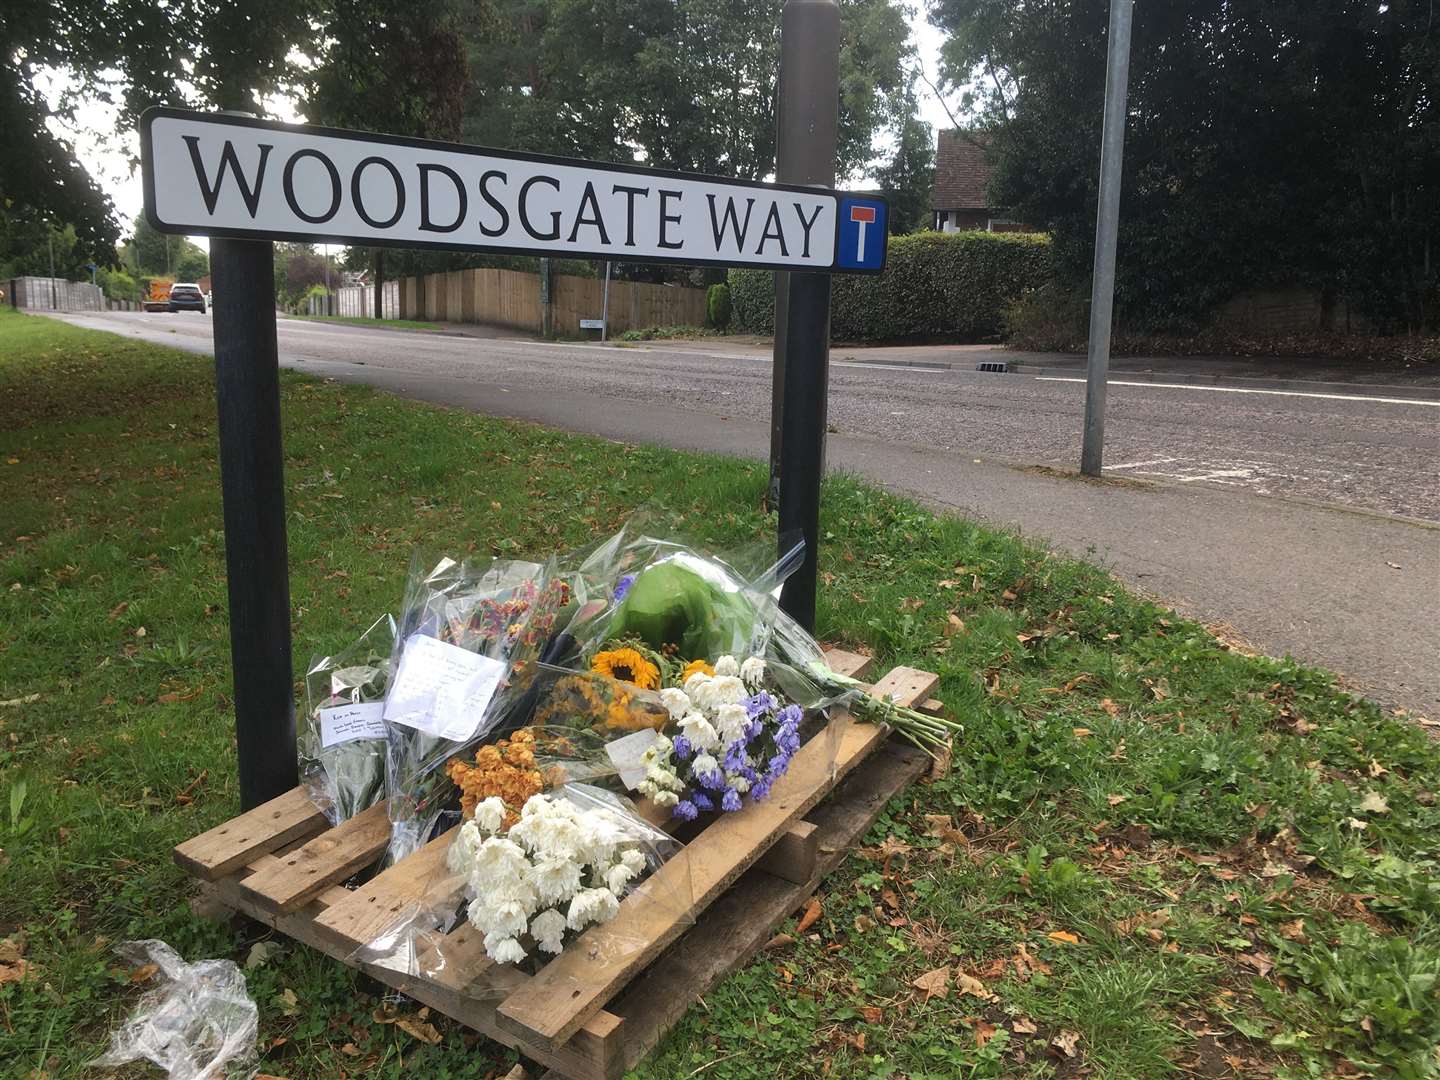 Floral tributes were left at the scene of the crash